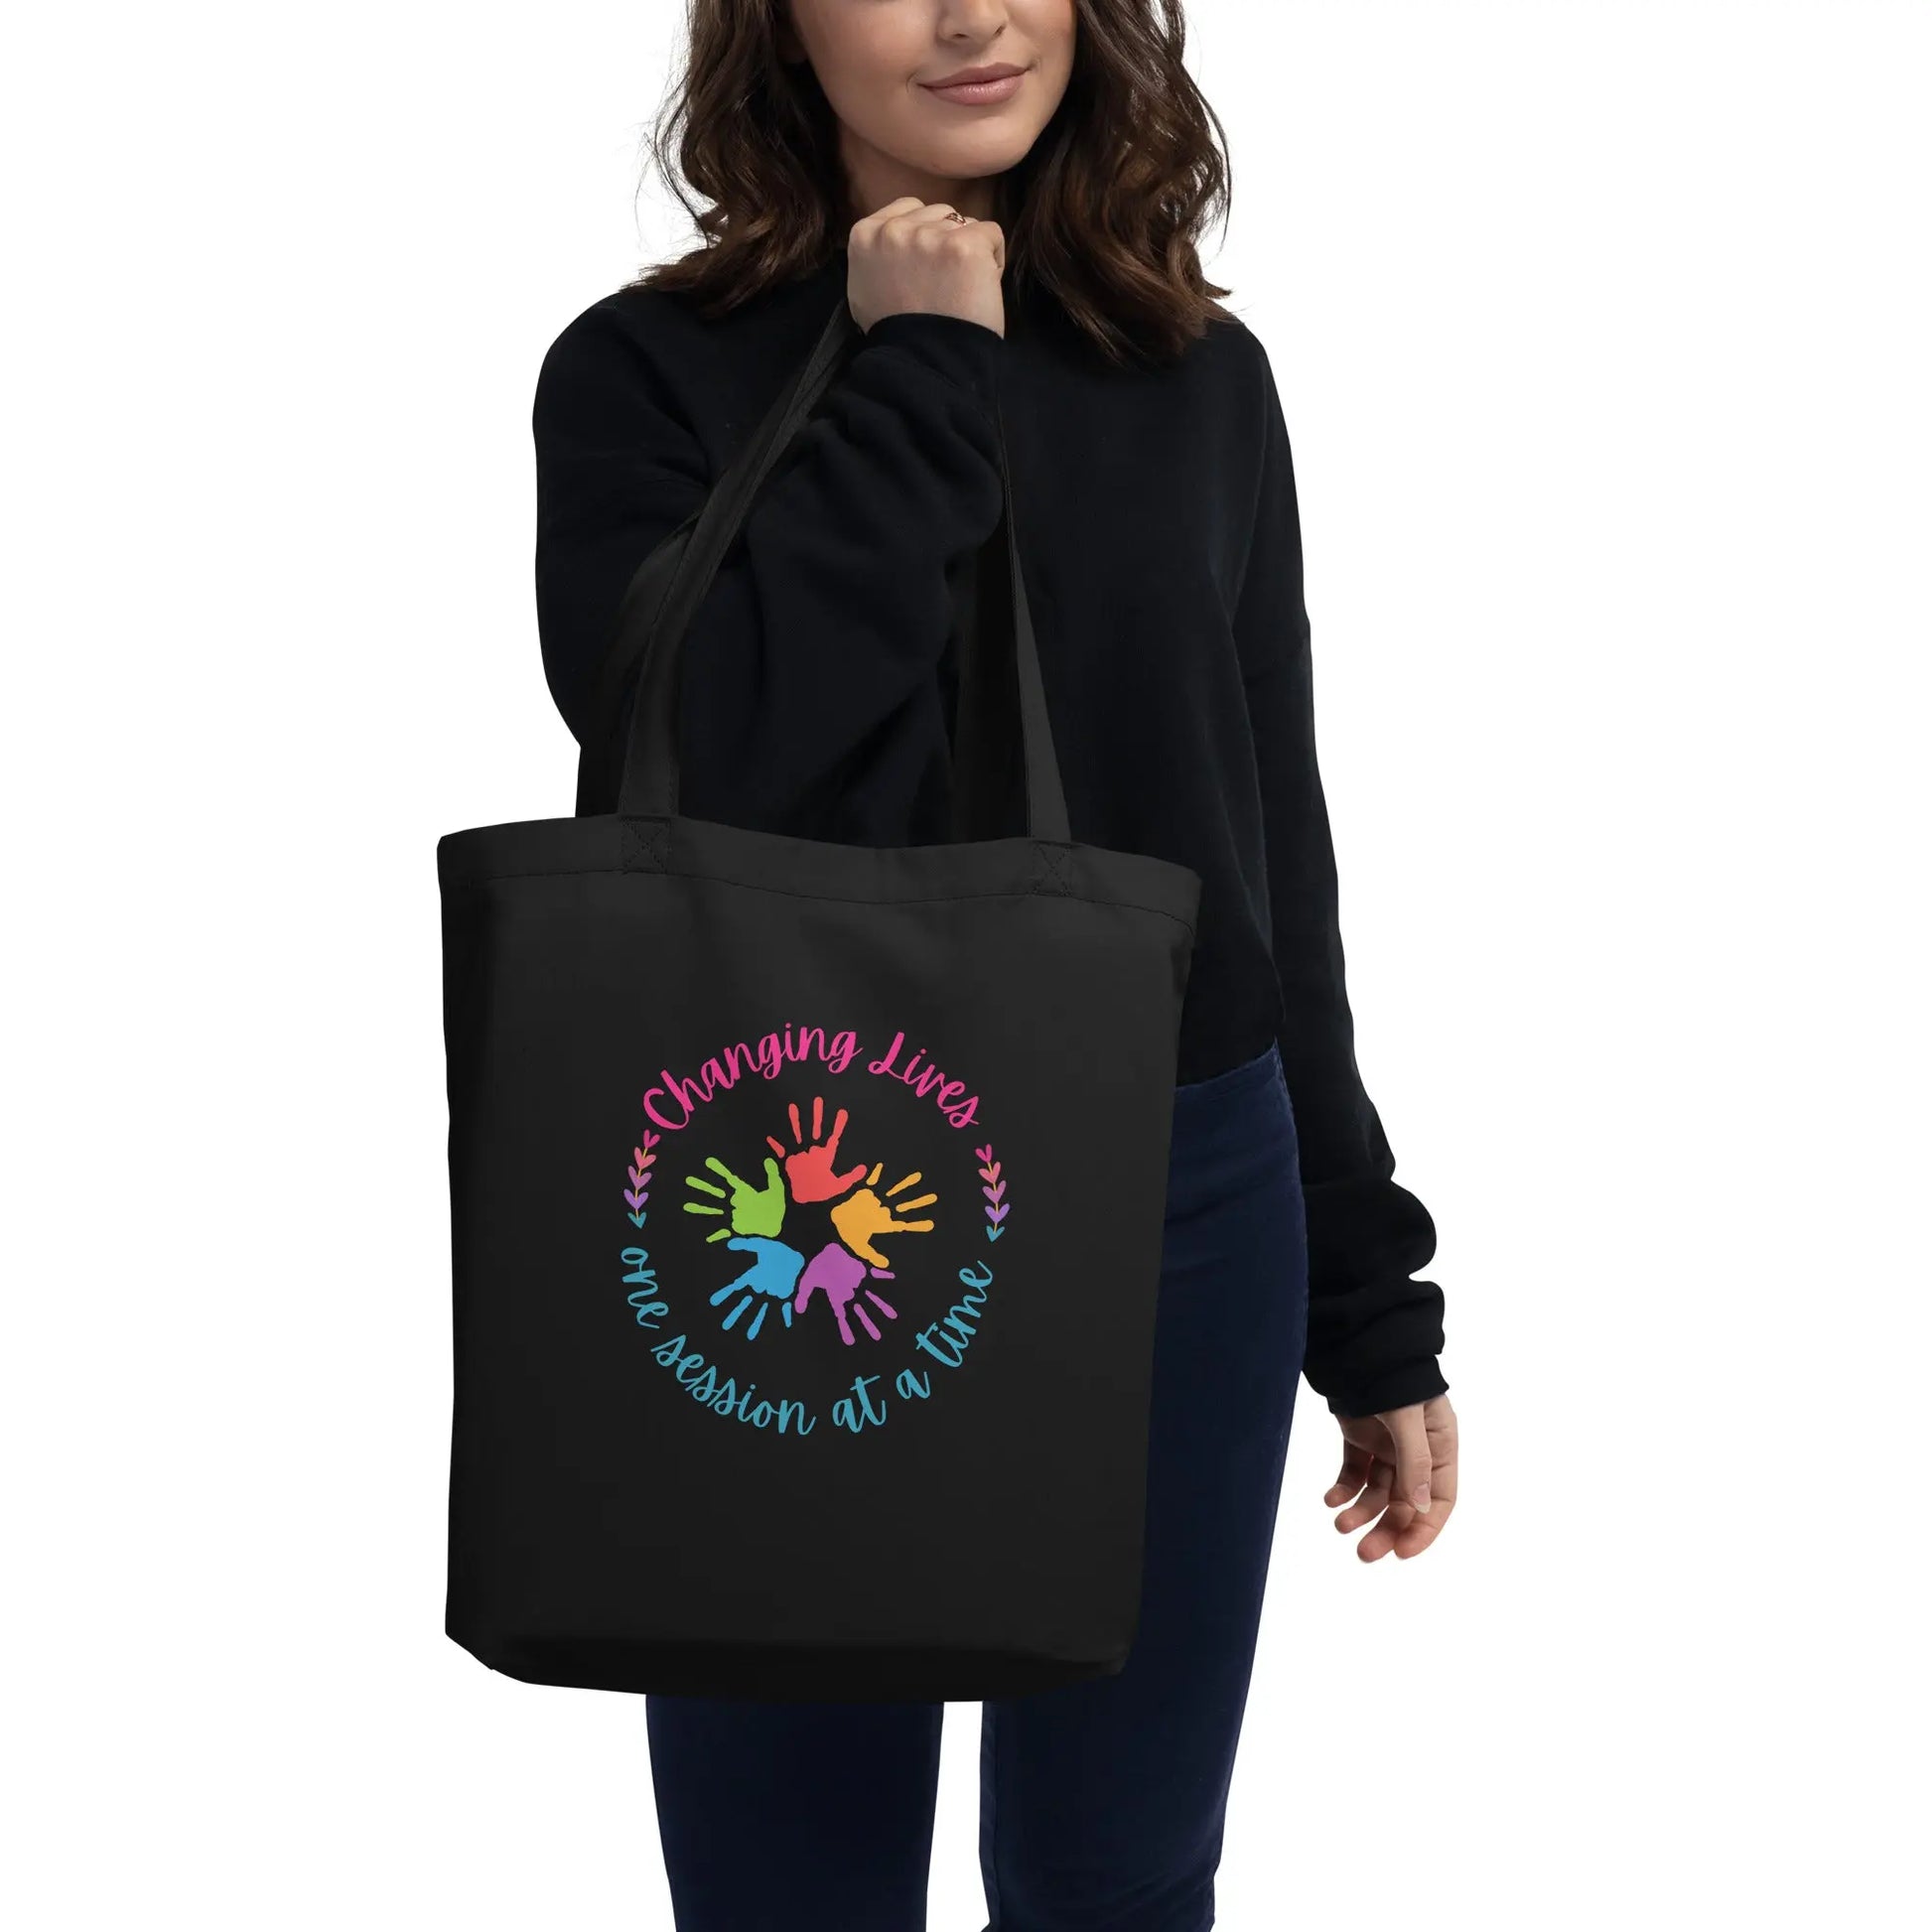 Changing Lives One Session at a Time Tote Bag ABA Therapy Tote, Perfect Gift for Therapist, Inspirational quote Bag Affordable ABA Materials